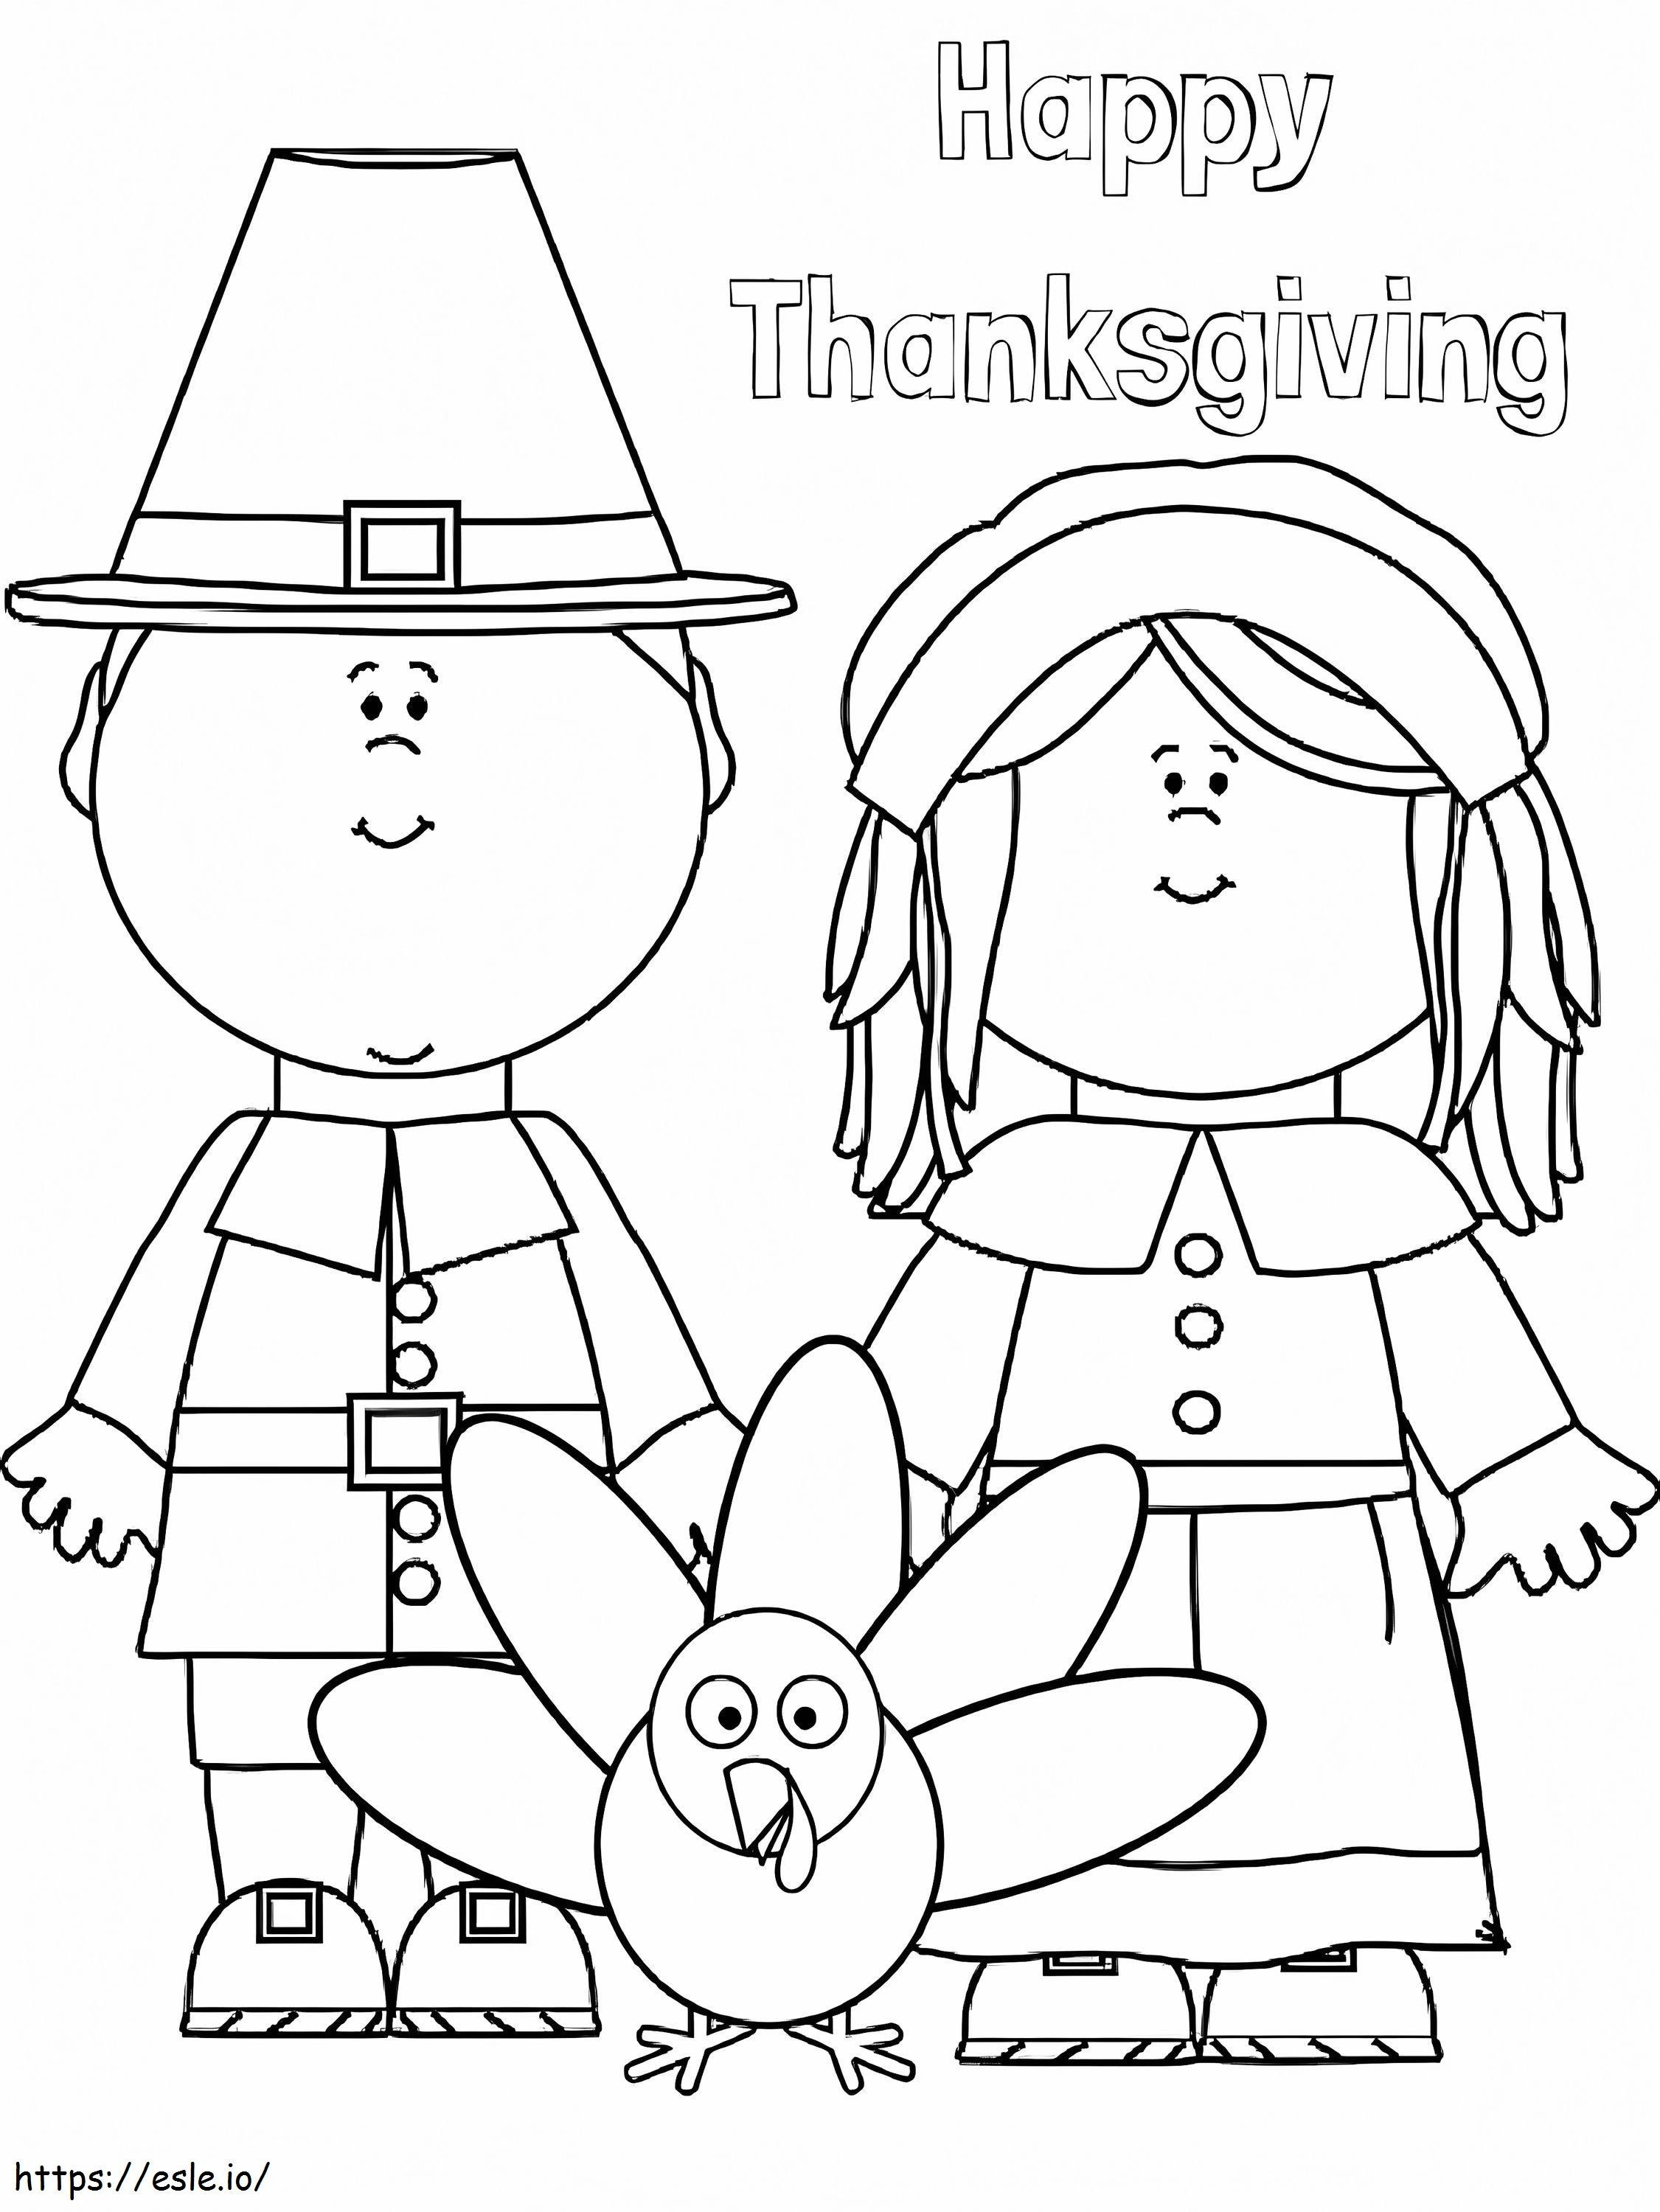 Cad907744997Cb279647451B69F133A6 coloring page